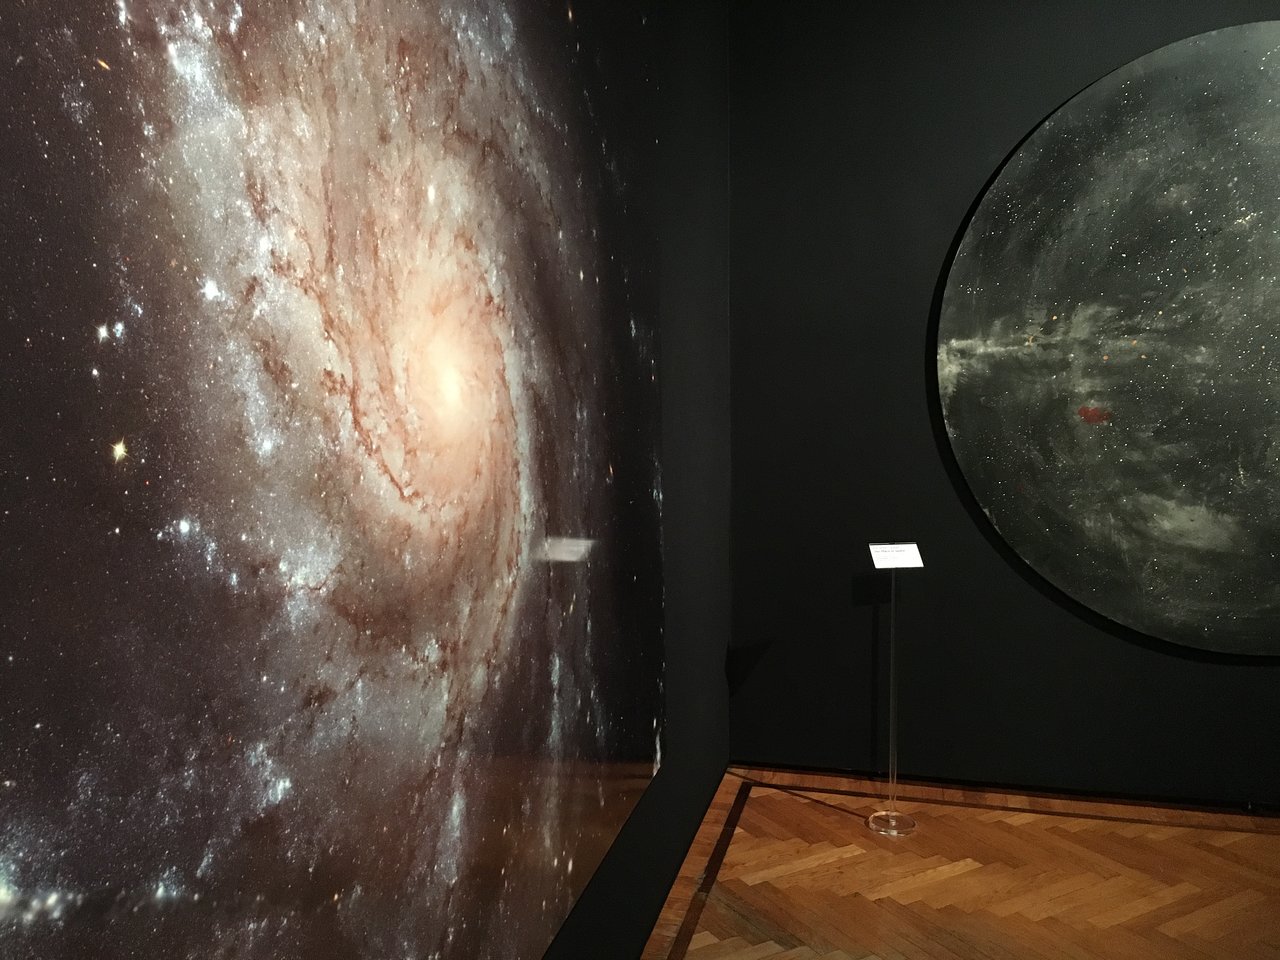 Beauty in art and space